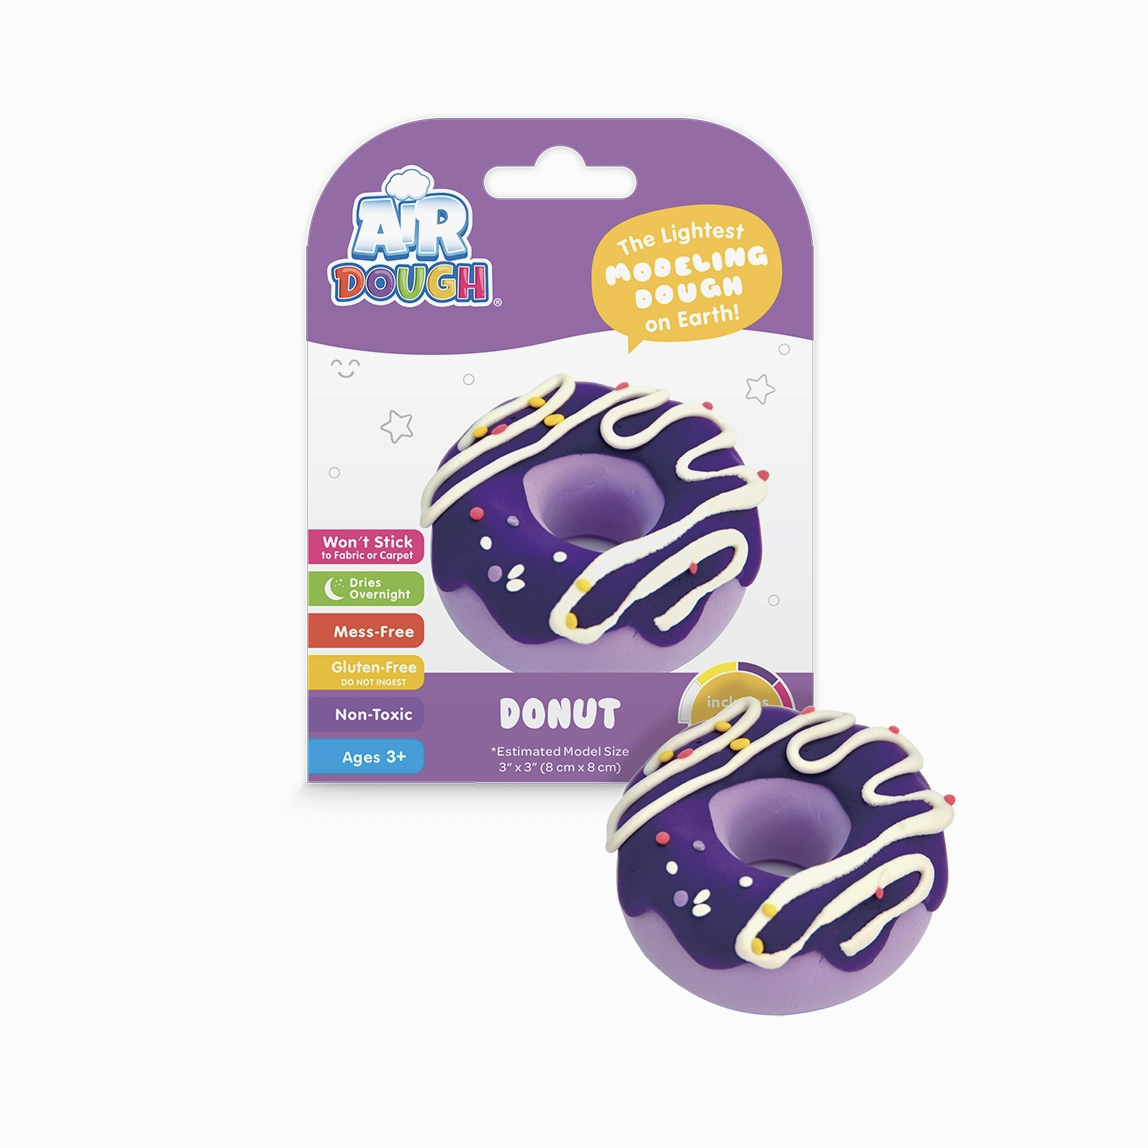 Air Dough "Donut" Modeling Clay